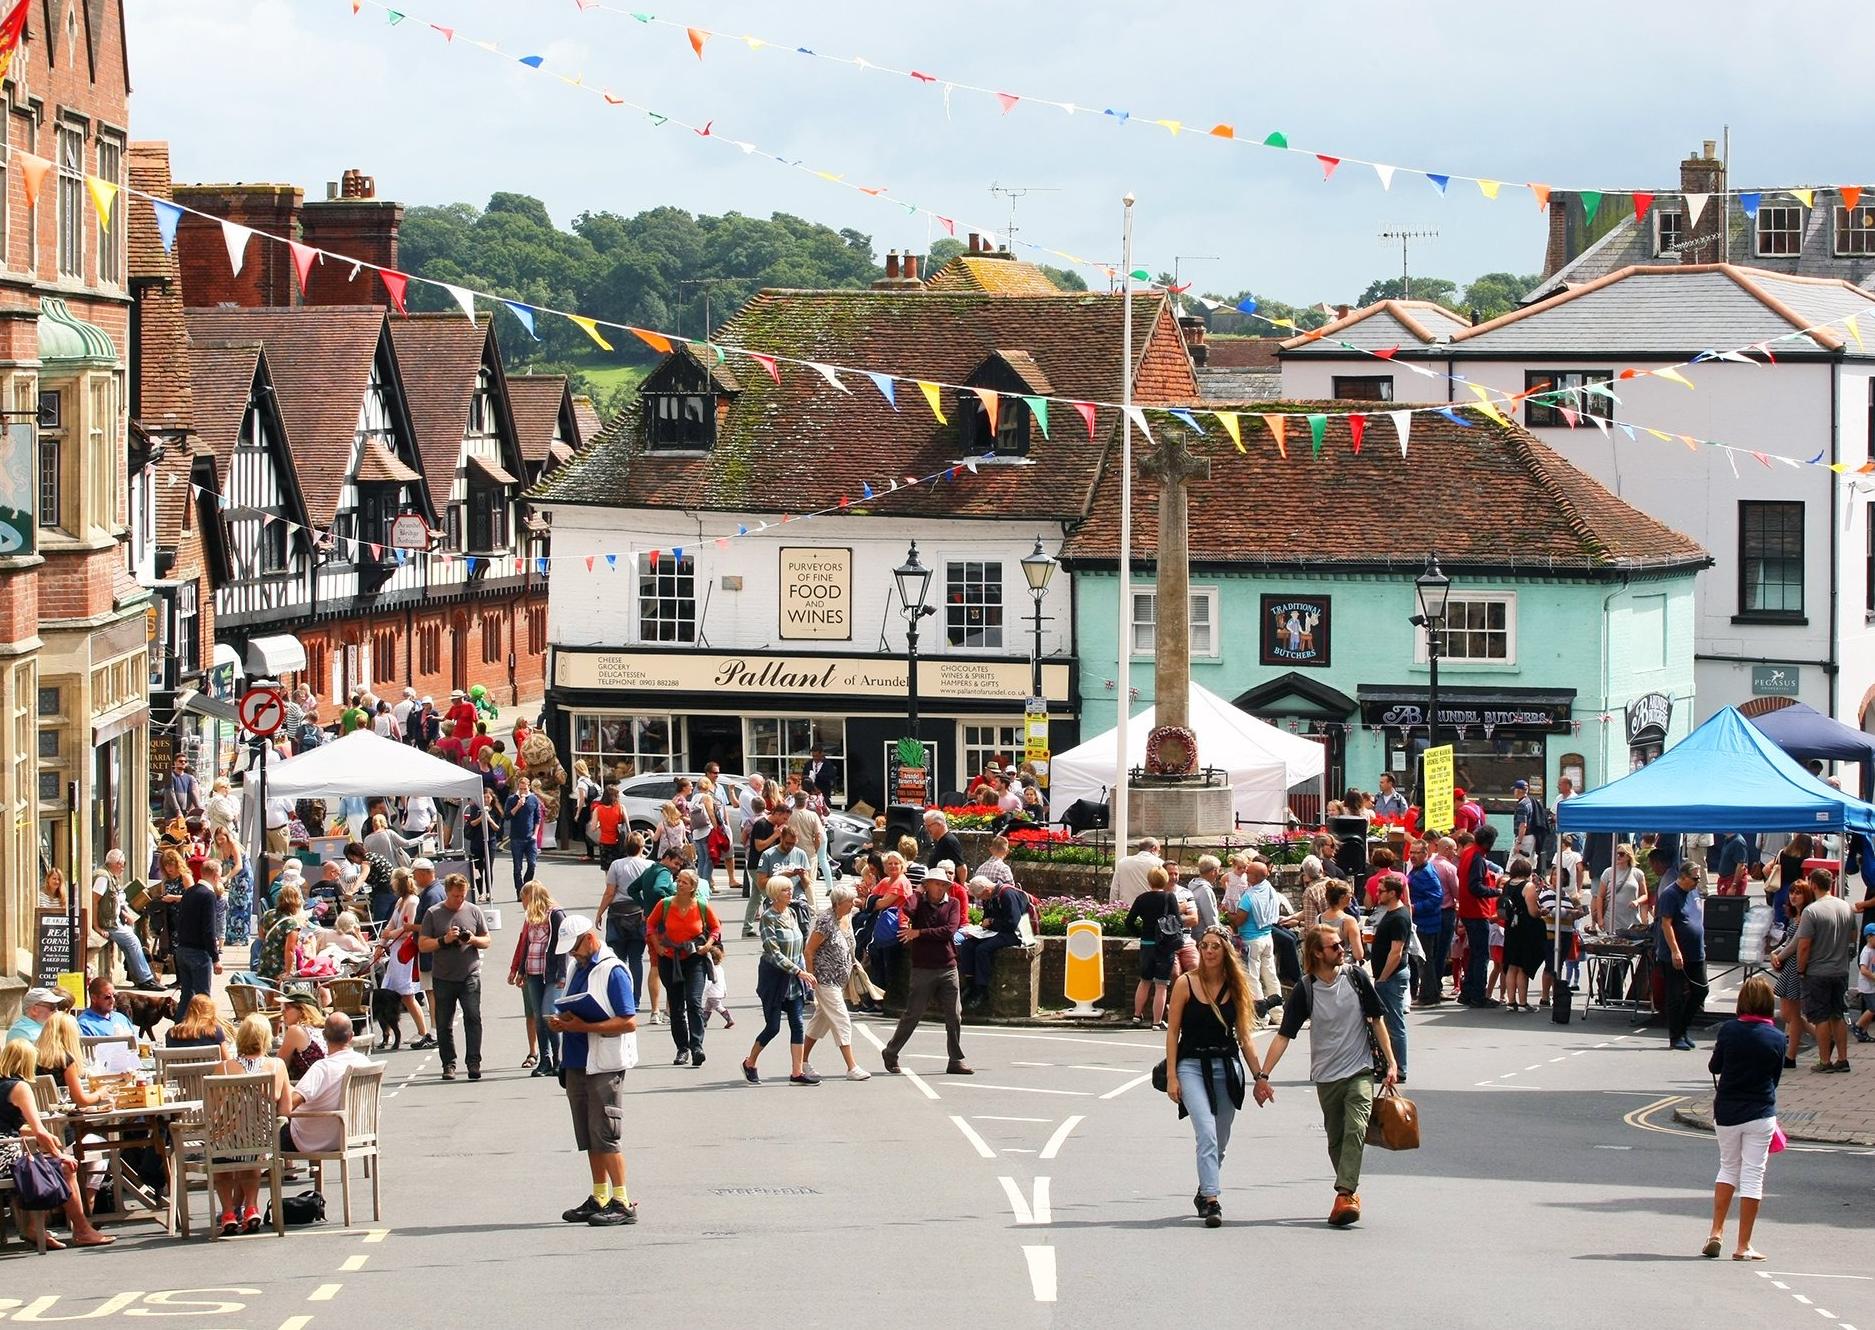 The Arundel Festival returns once again in August, with dates to be confirmed